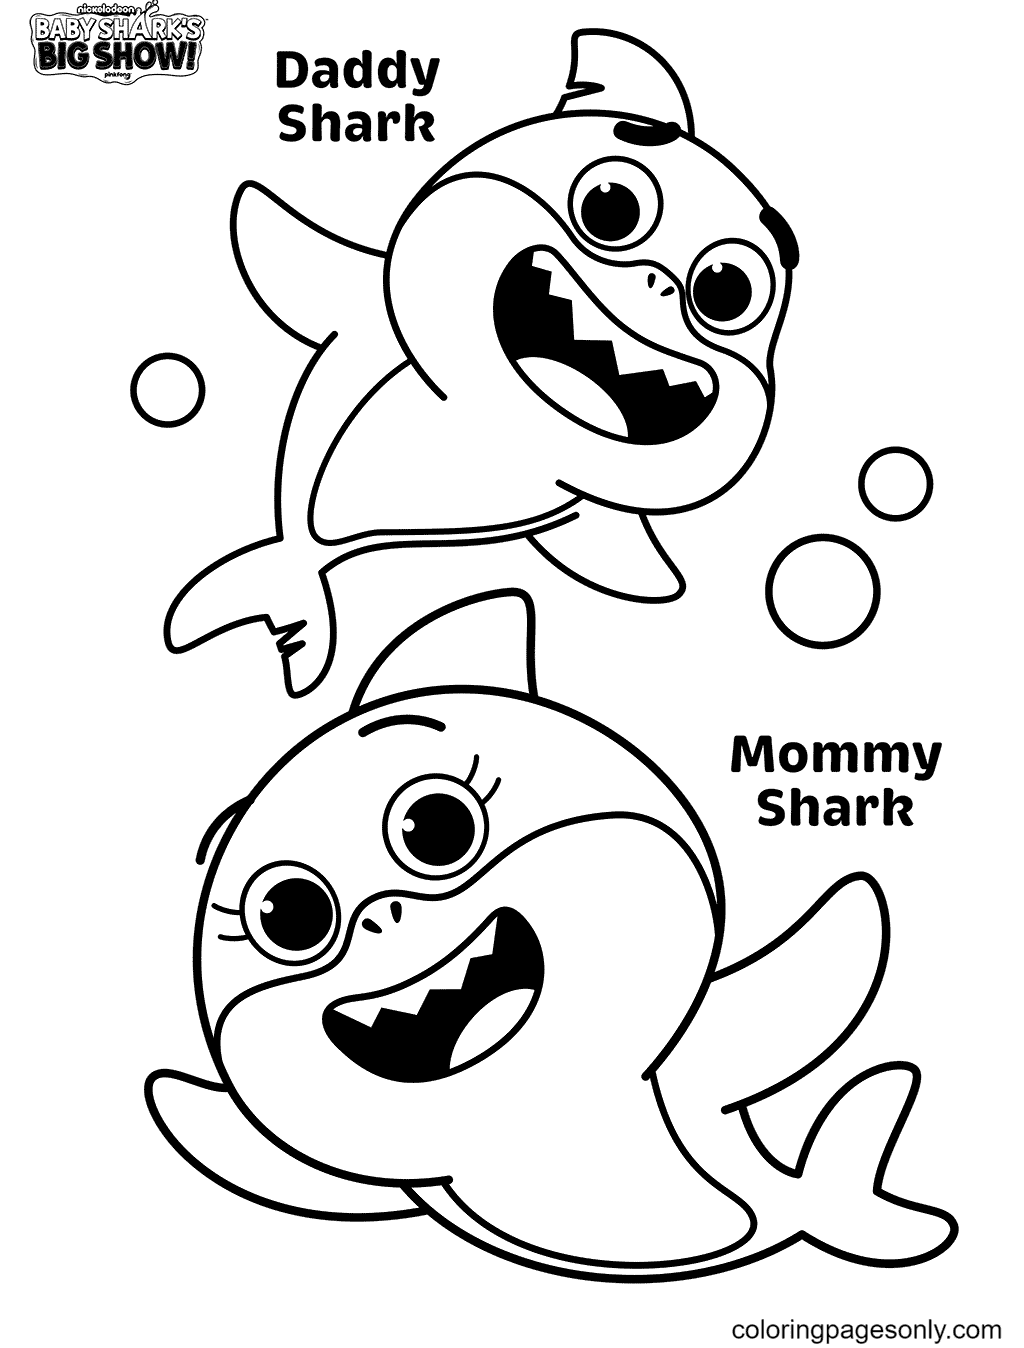 Baby shark coloring pages printable for free download